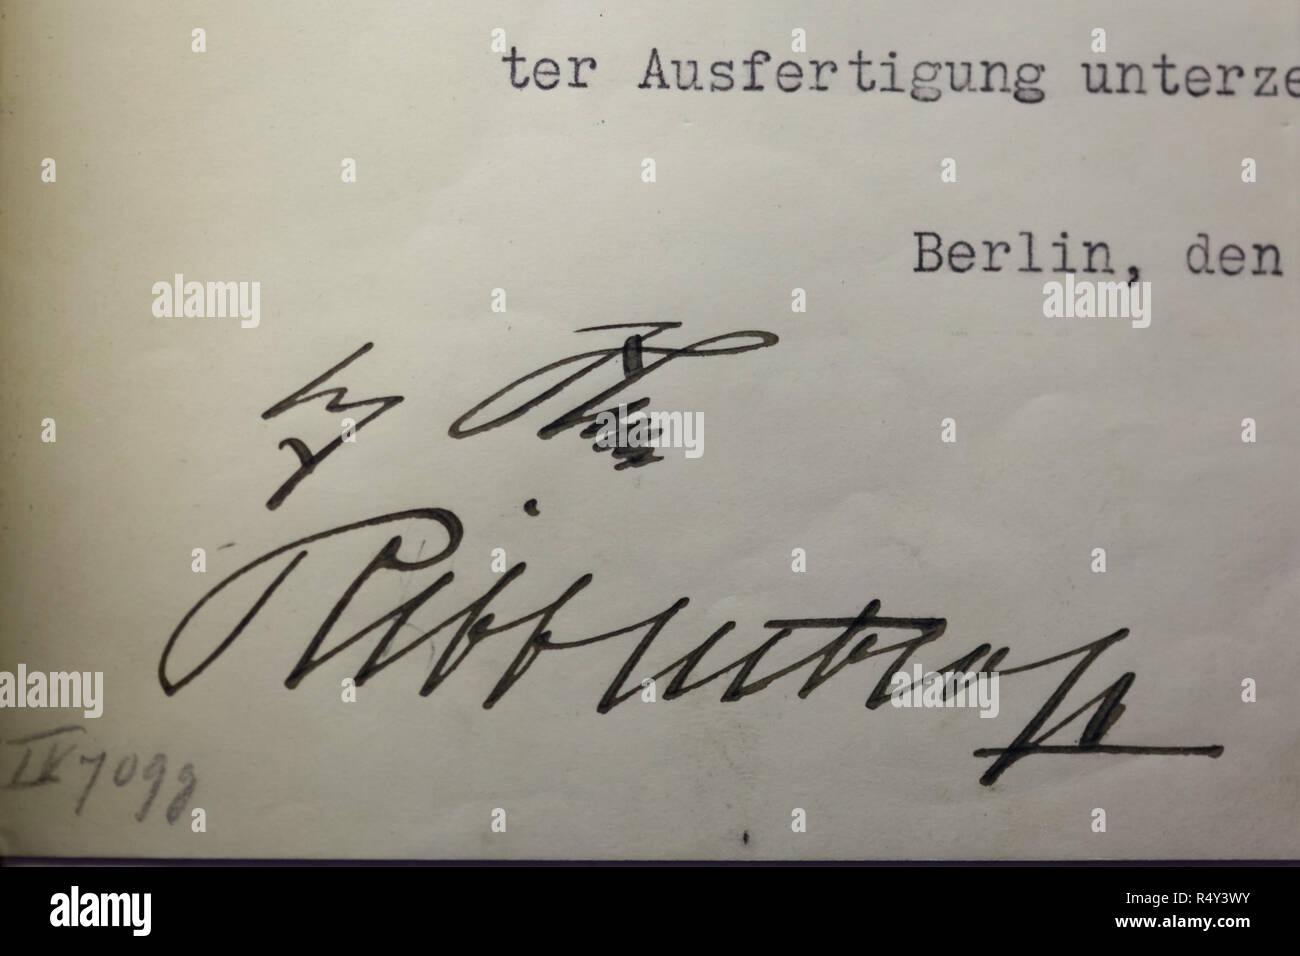 Signatures of Adolf Hitler and Joachim von Ribbentrop under the Hácha Hitler Protocol on display at the Czech-Slovak Exhibition (Česko-slovenská výstava) in the National Museum (Národní muzeum) in Prague, Czech Republic. The document signed in Berlin on 15 March 1939 by the President of Czechoslovakia Emil Hácha and the Minister of Foreign Affairs of Czechoslovakia František Chvalkovský put the territory and population of Bohemia and Moravia under the protection of the German Reich and ensured that the occupation of the Czech territory would not be resisted by the local people and military. On Stock Photo